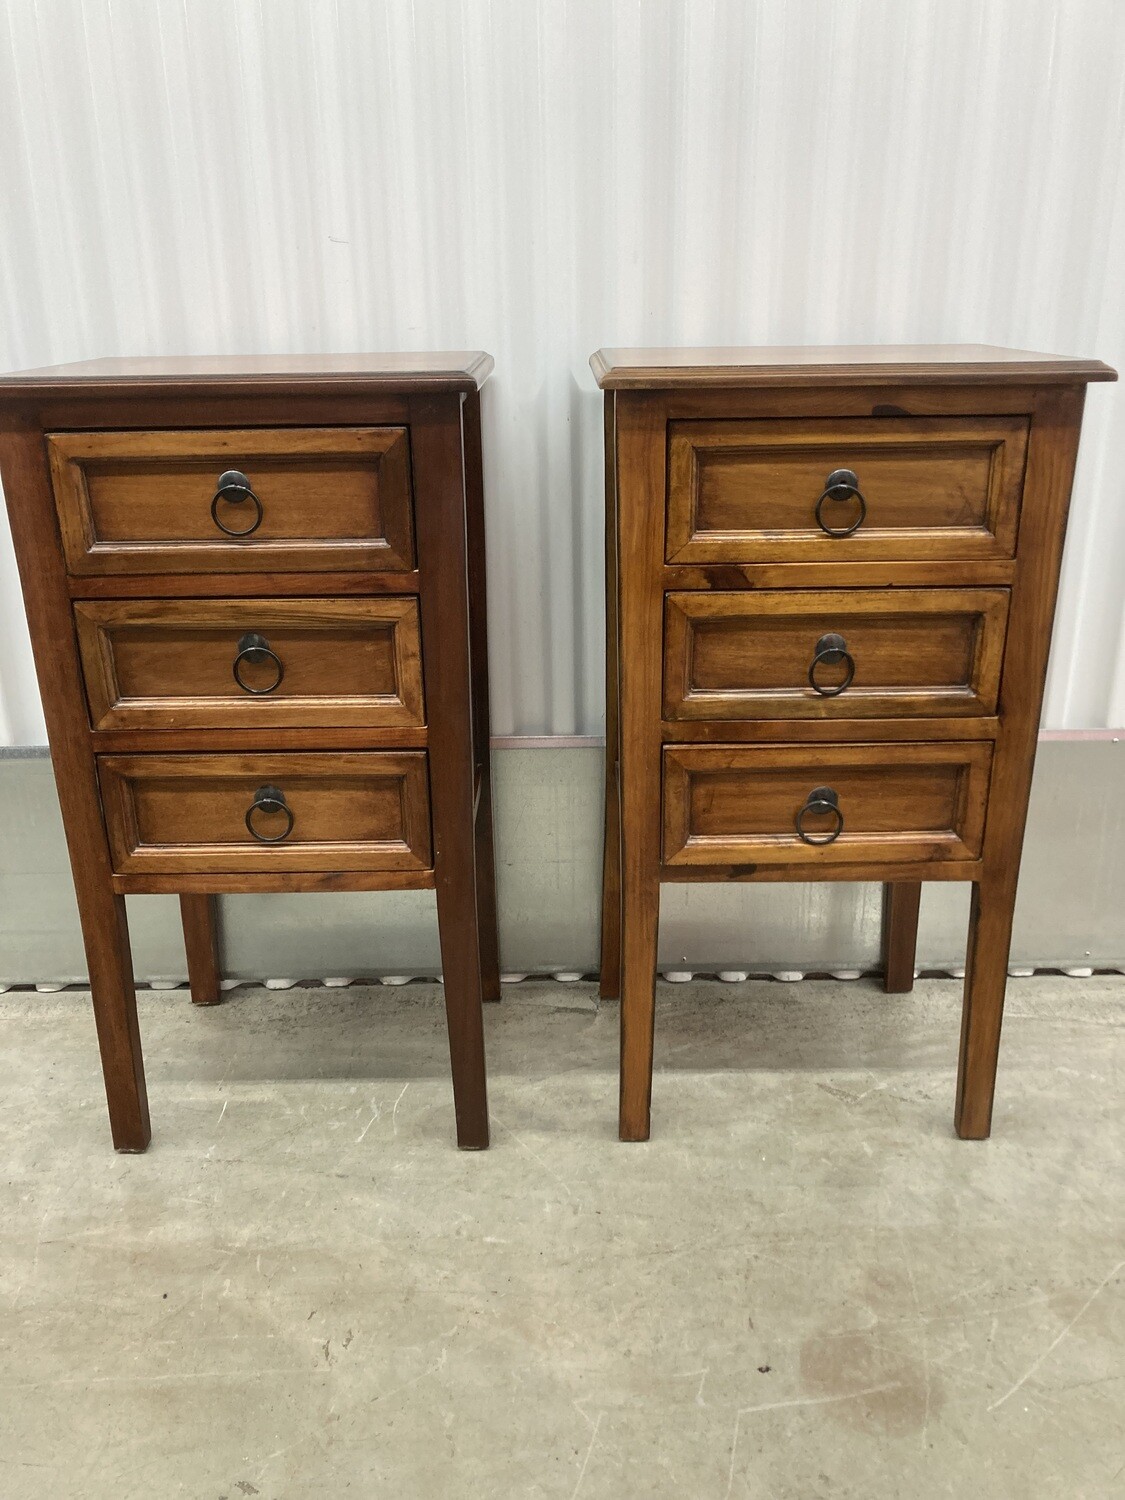 ** Wood Storage Cabinet, black pulls, 2 available #2114